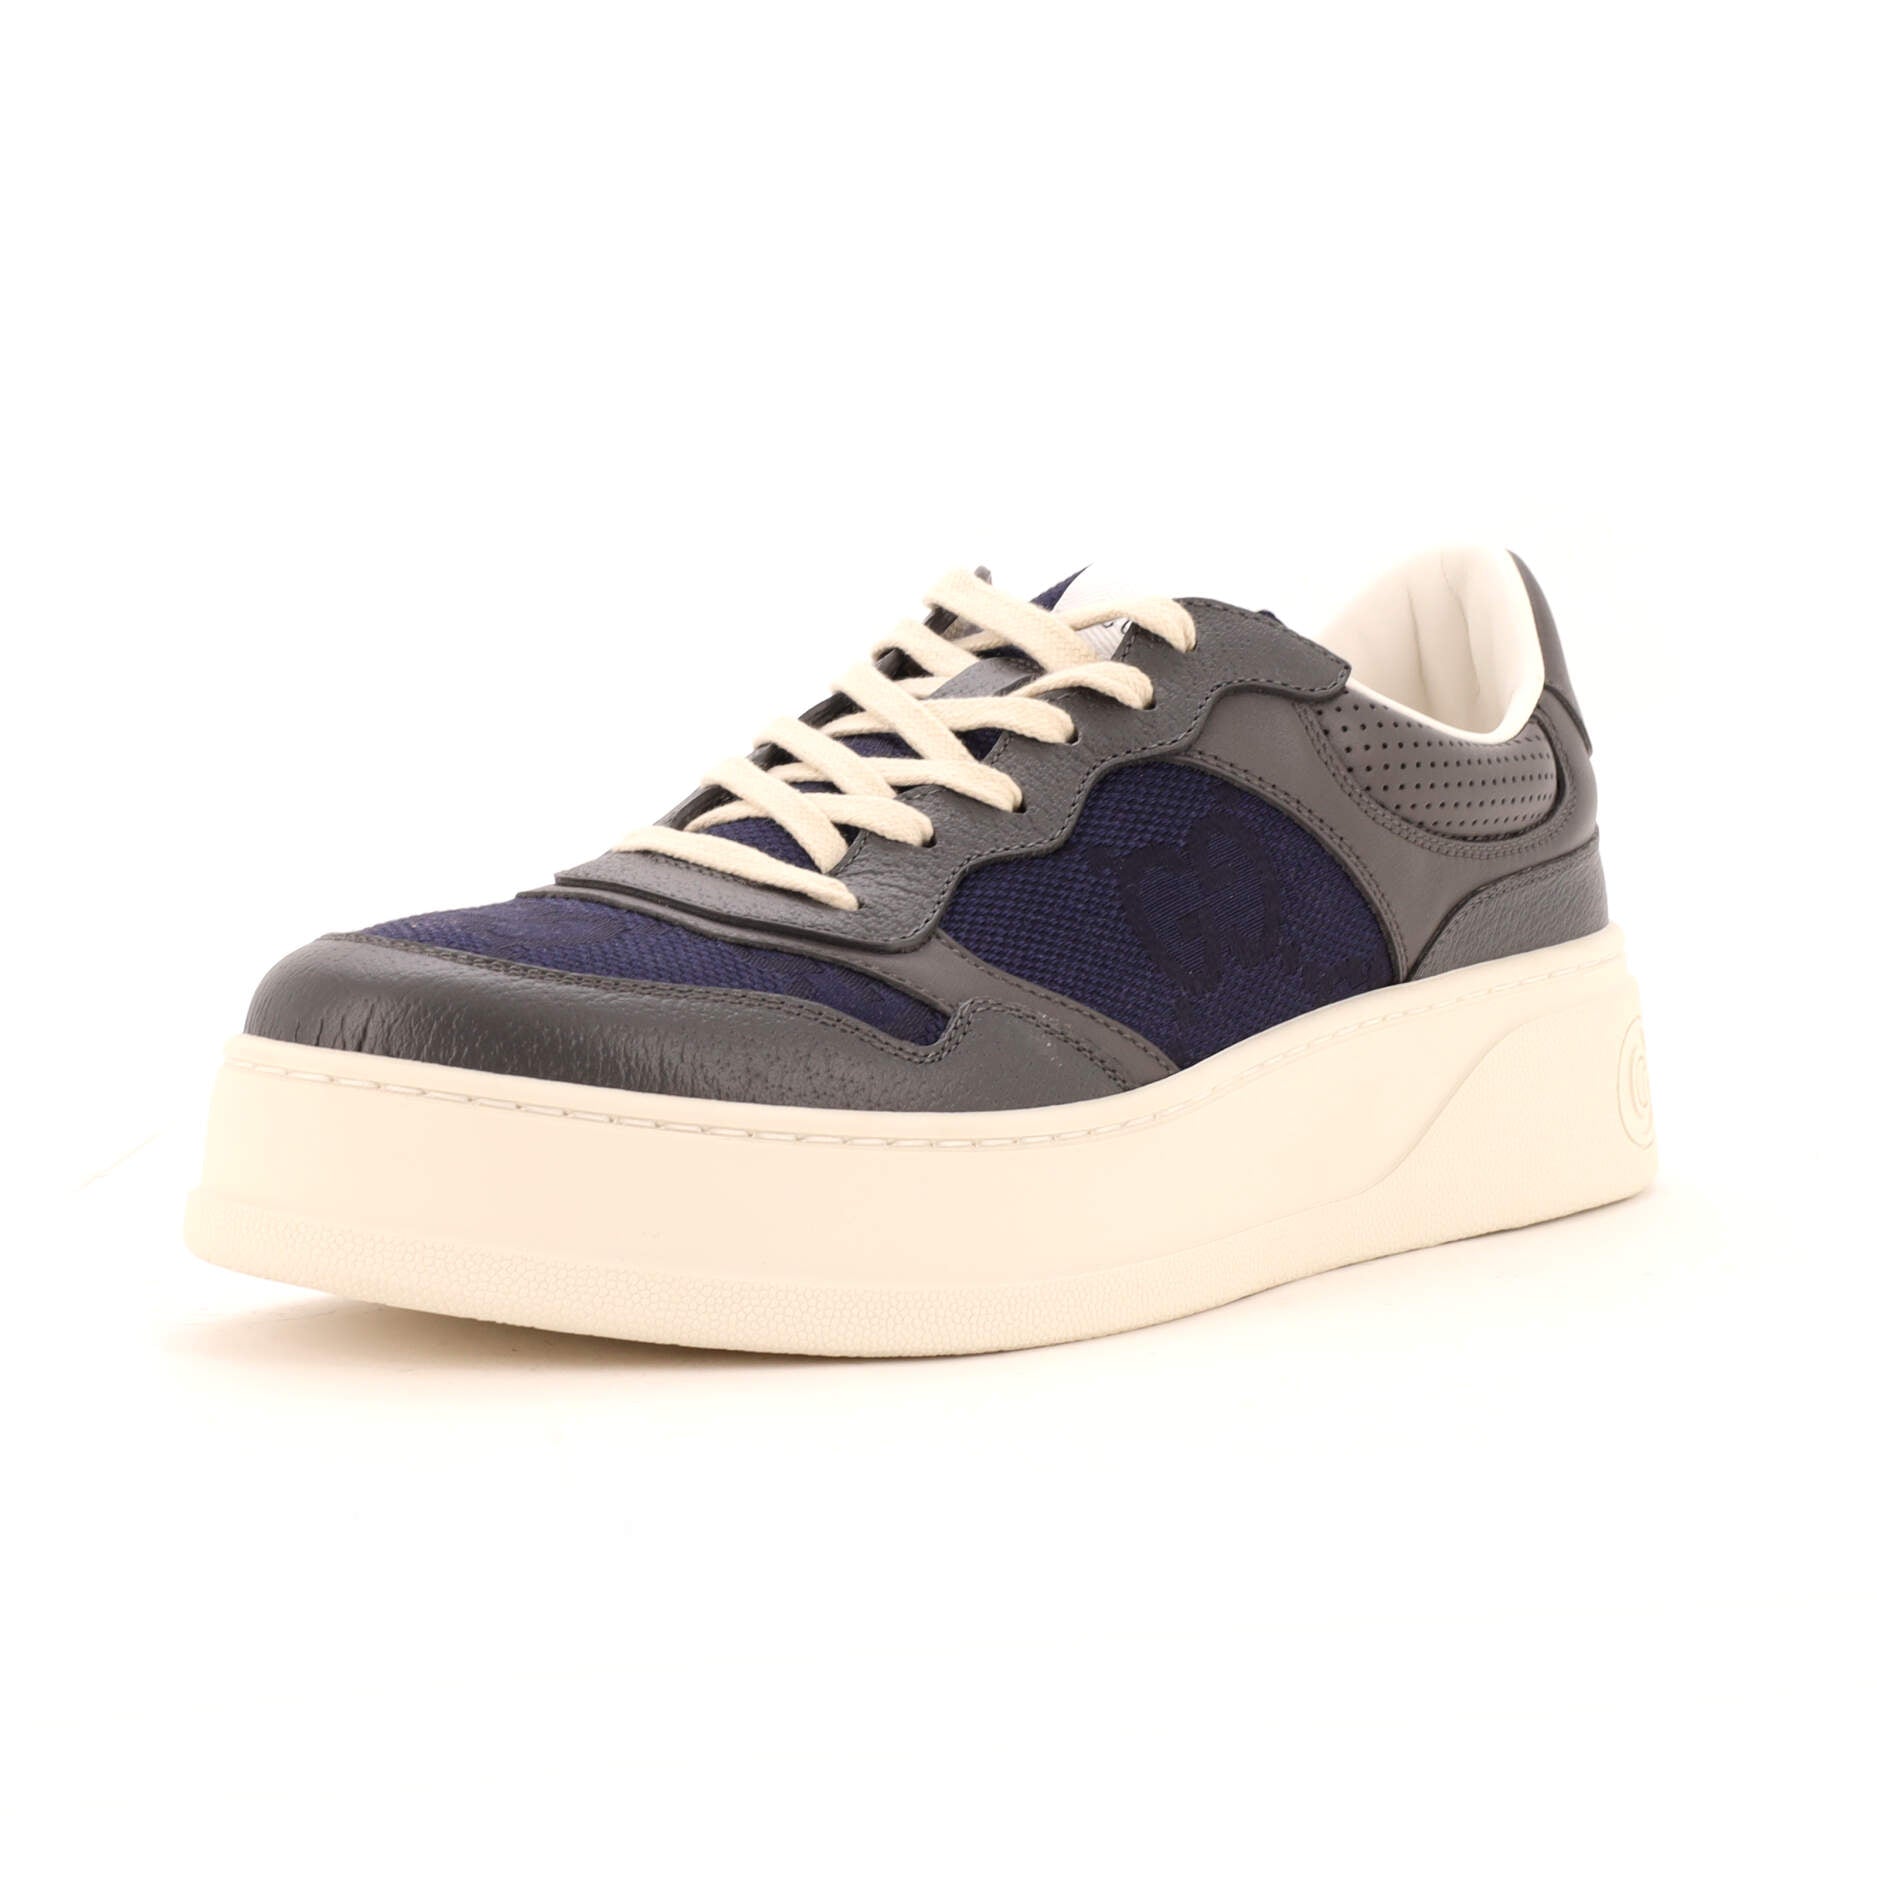 Men's Dali Sneakers GG Canvas with Leather